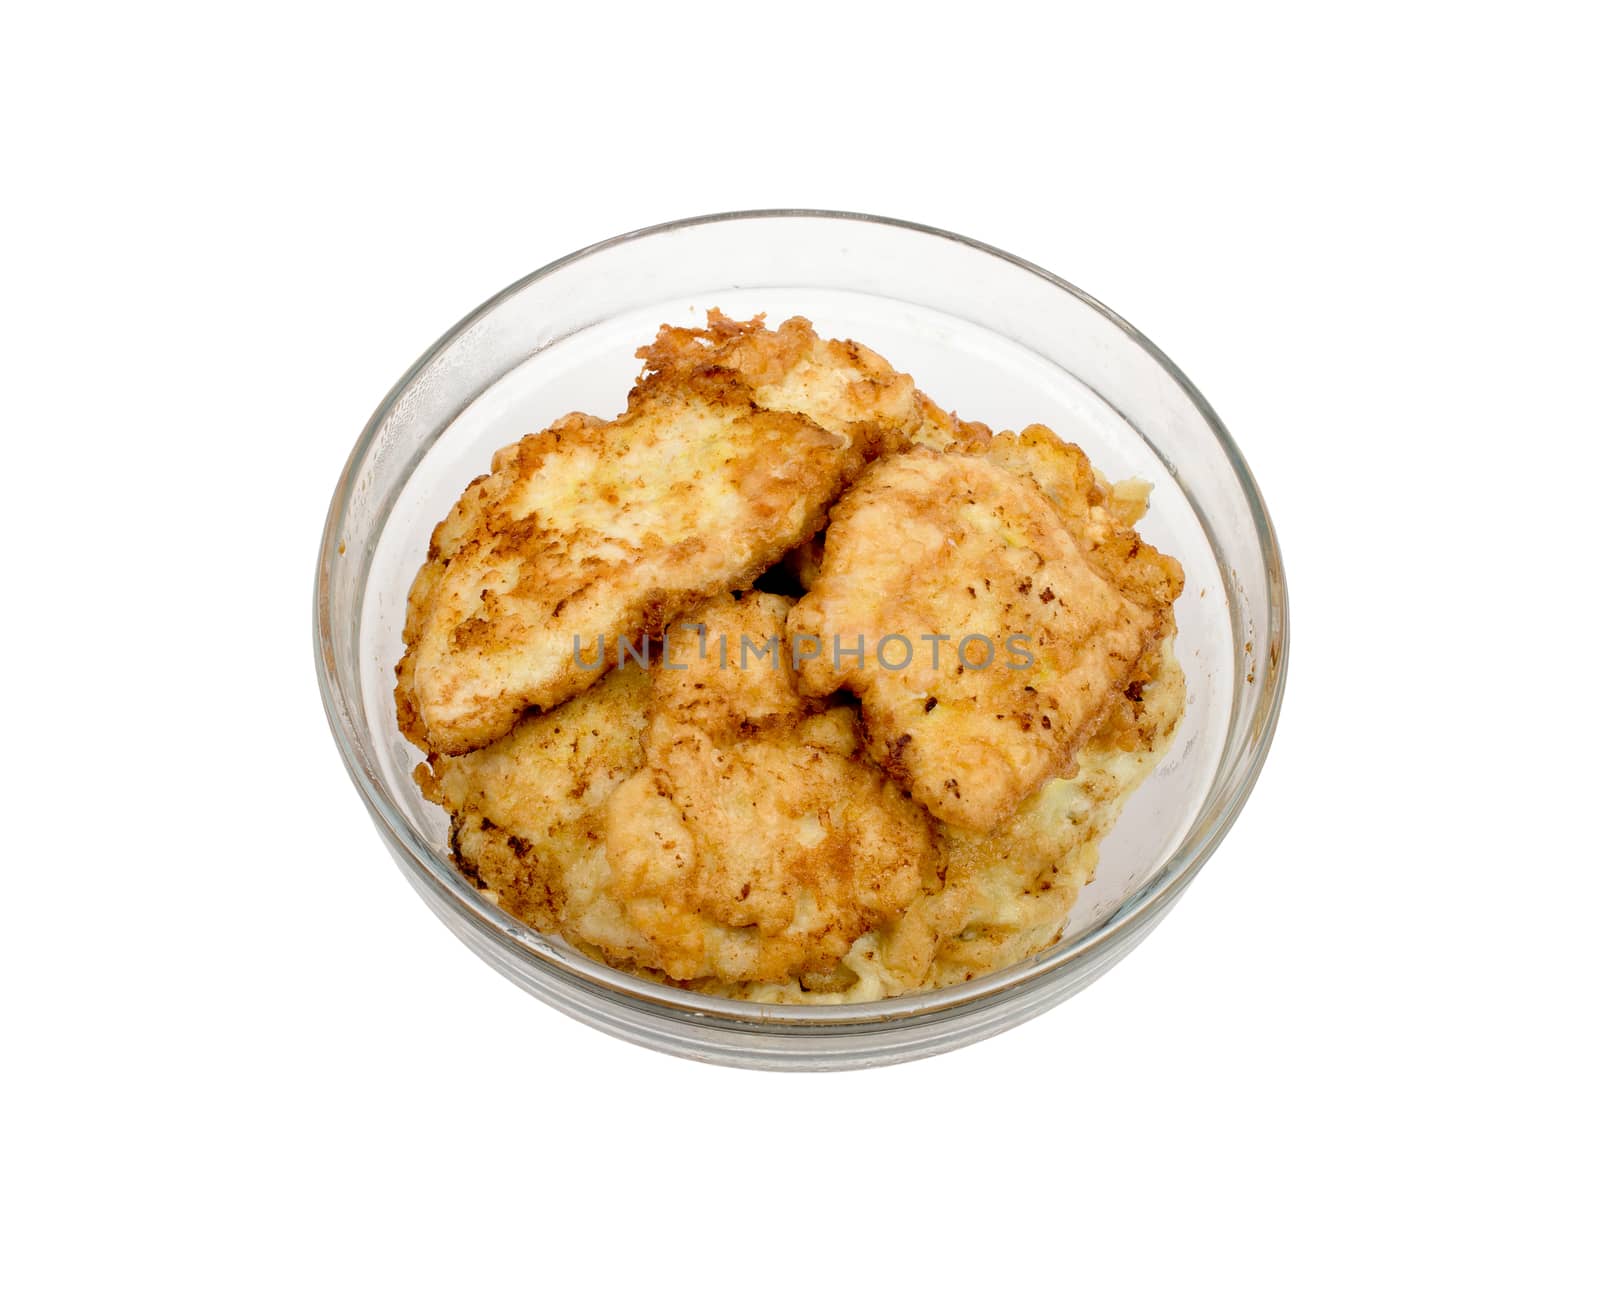 Fried breaded chops in a transparent bowl on a white background